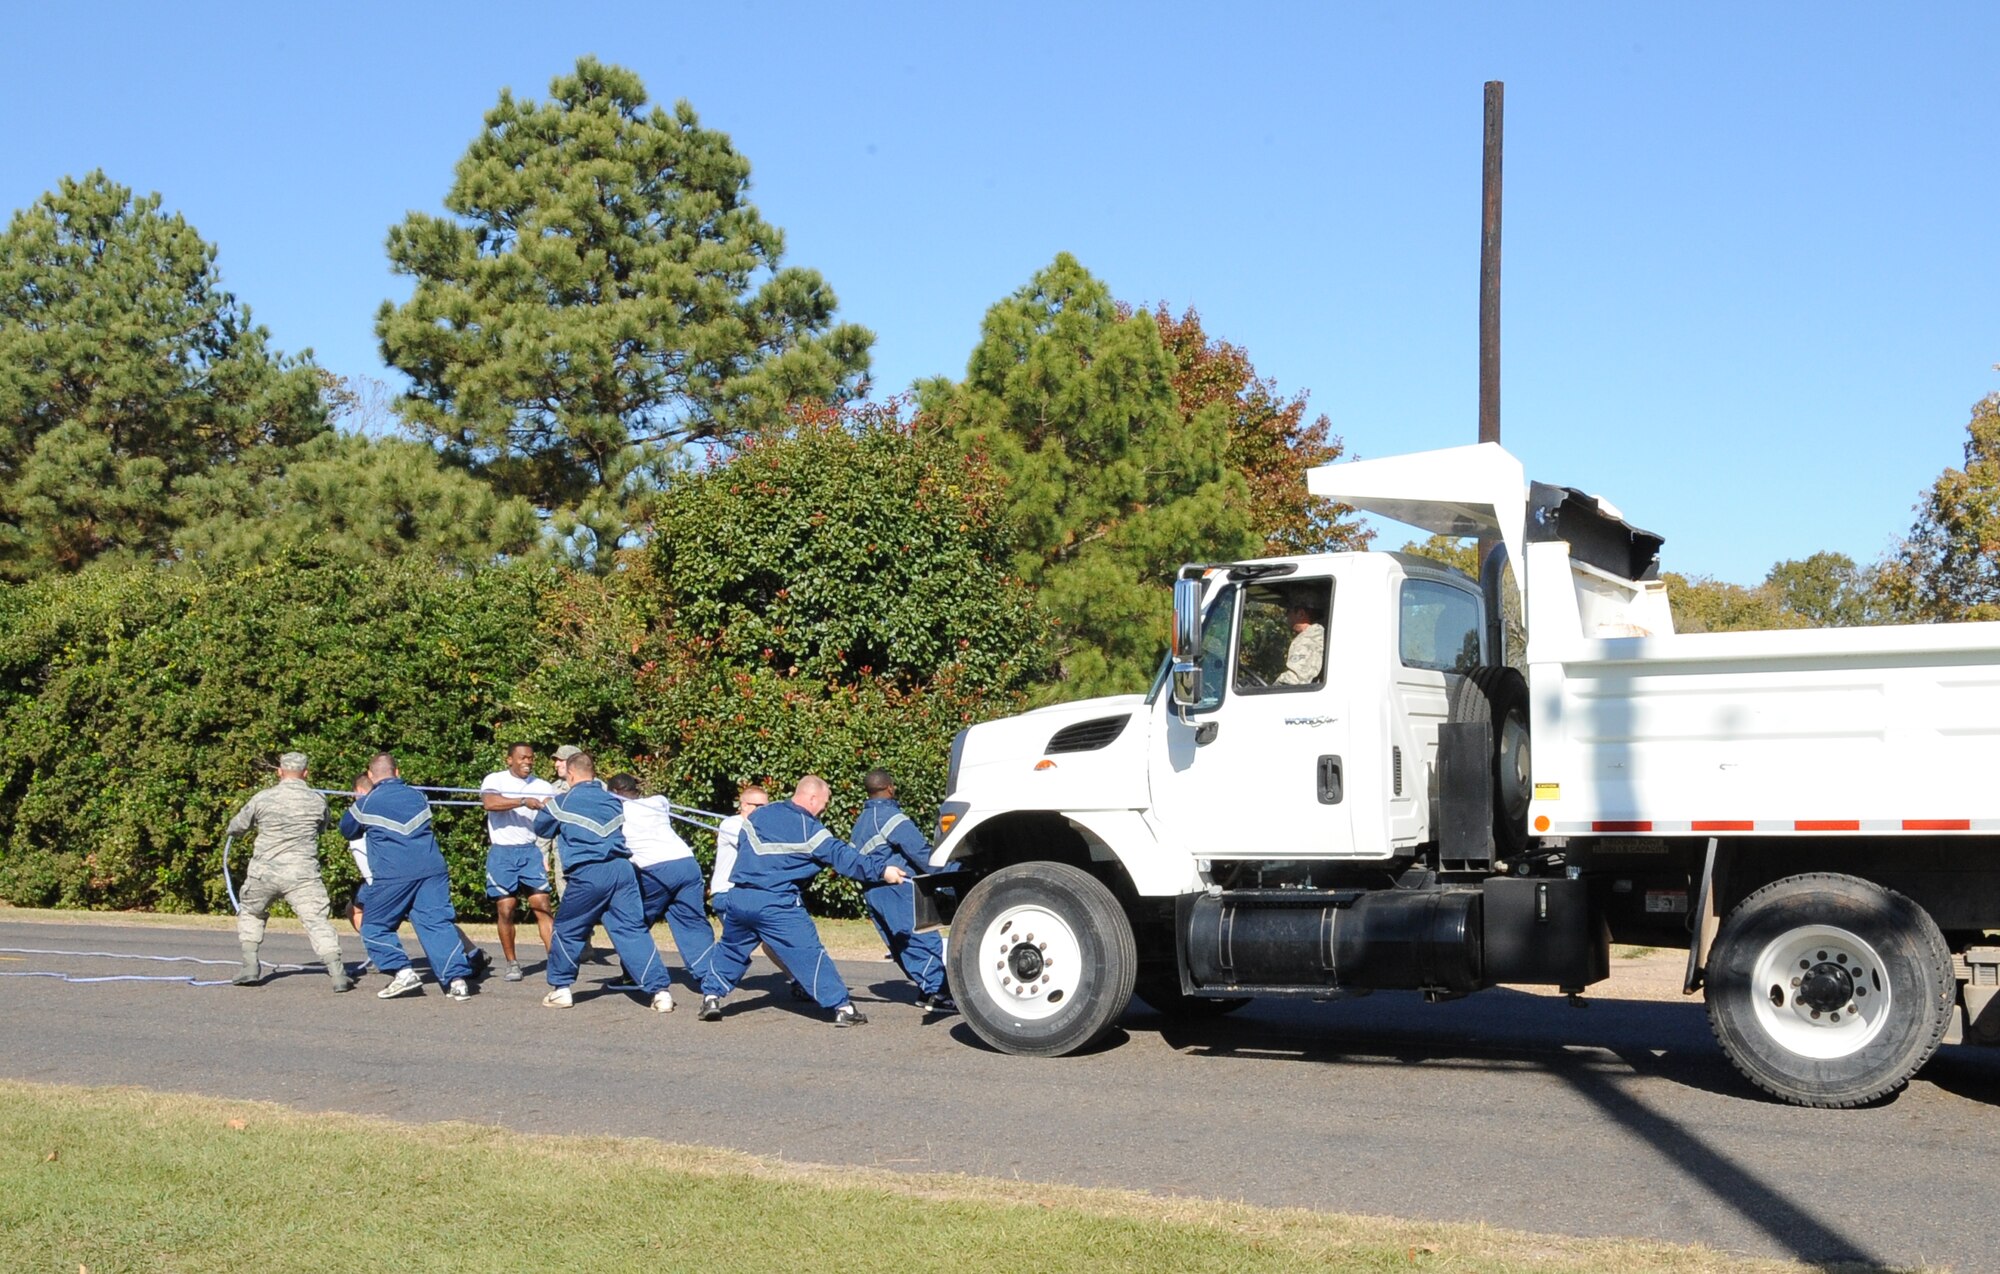 Airmen from the 2nd Civil Engineer Squadron pull a dump truck during the 2012 Sports Day on Barksdale Air Force Base, La., Nov. 16. Sports Day consisted of various team events including dodgeball, basketball, soccer, tug-of-war, volleyball, a homerun derby, flag football and racquetball. This day was designed to improve teamwork, and help increase the awareness of fitness, sports programs and boost morale. (U.S. Air Force photo/Airman 1st Class Benjamin Gonsier)(RELEASED)
